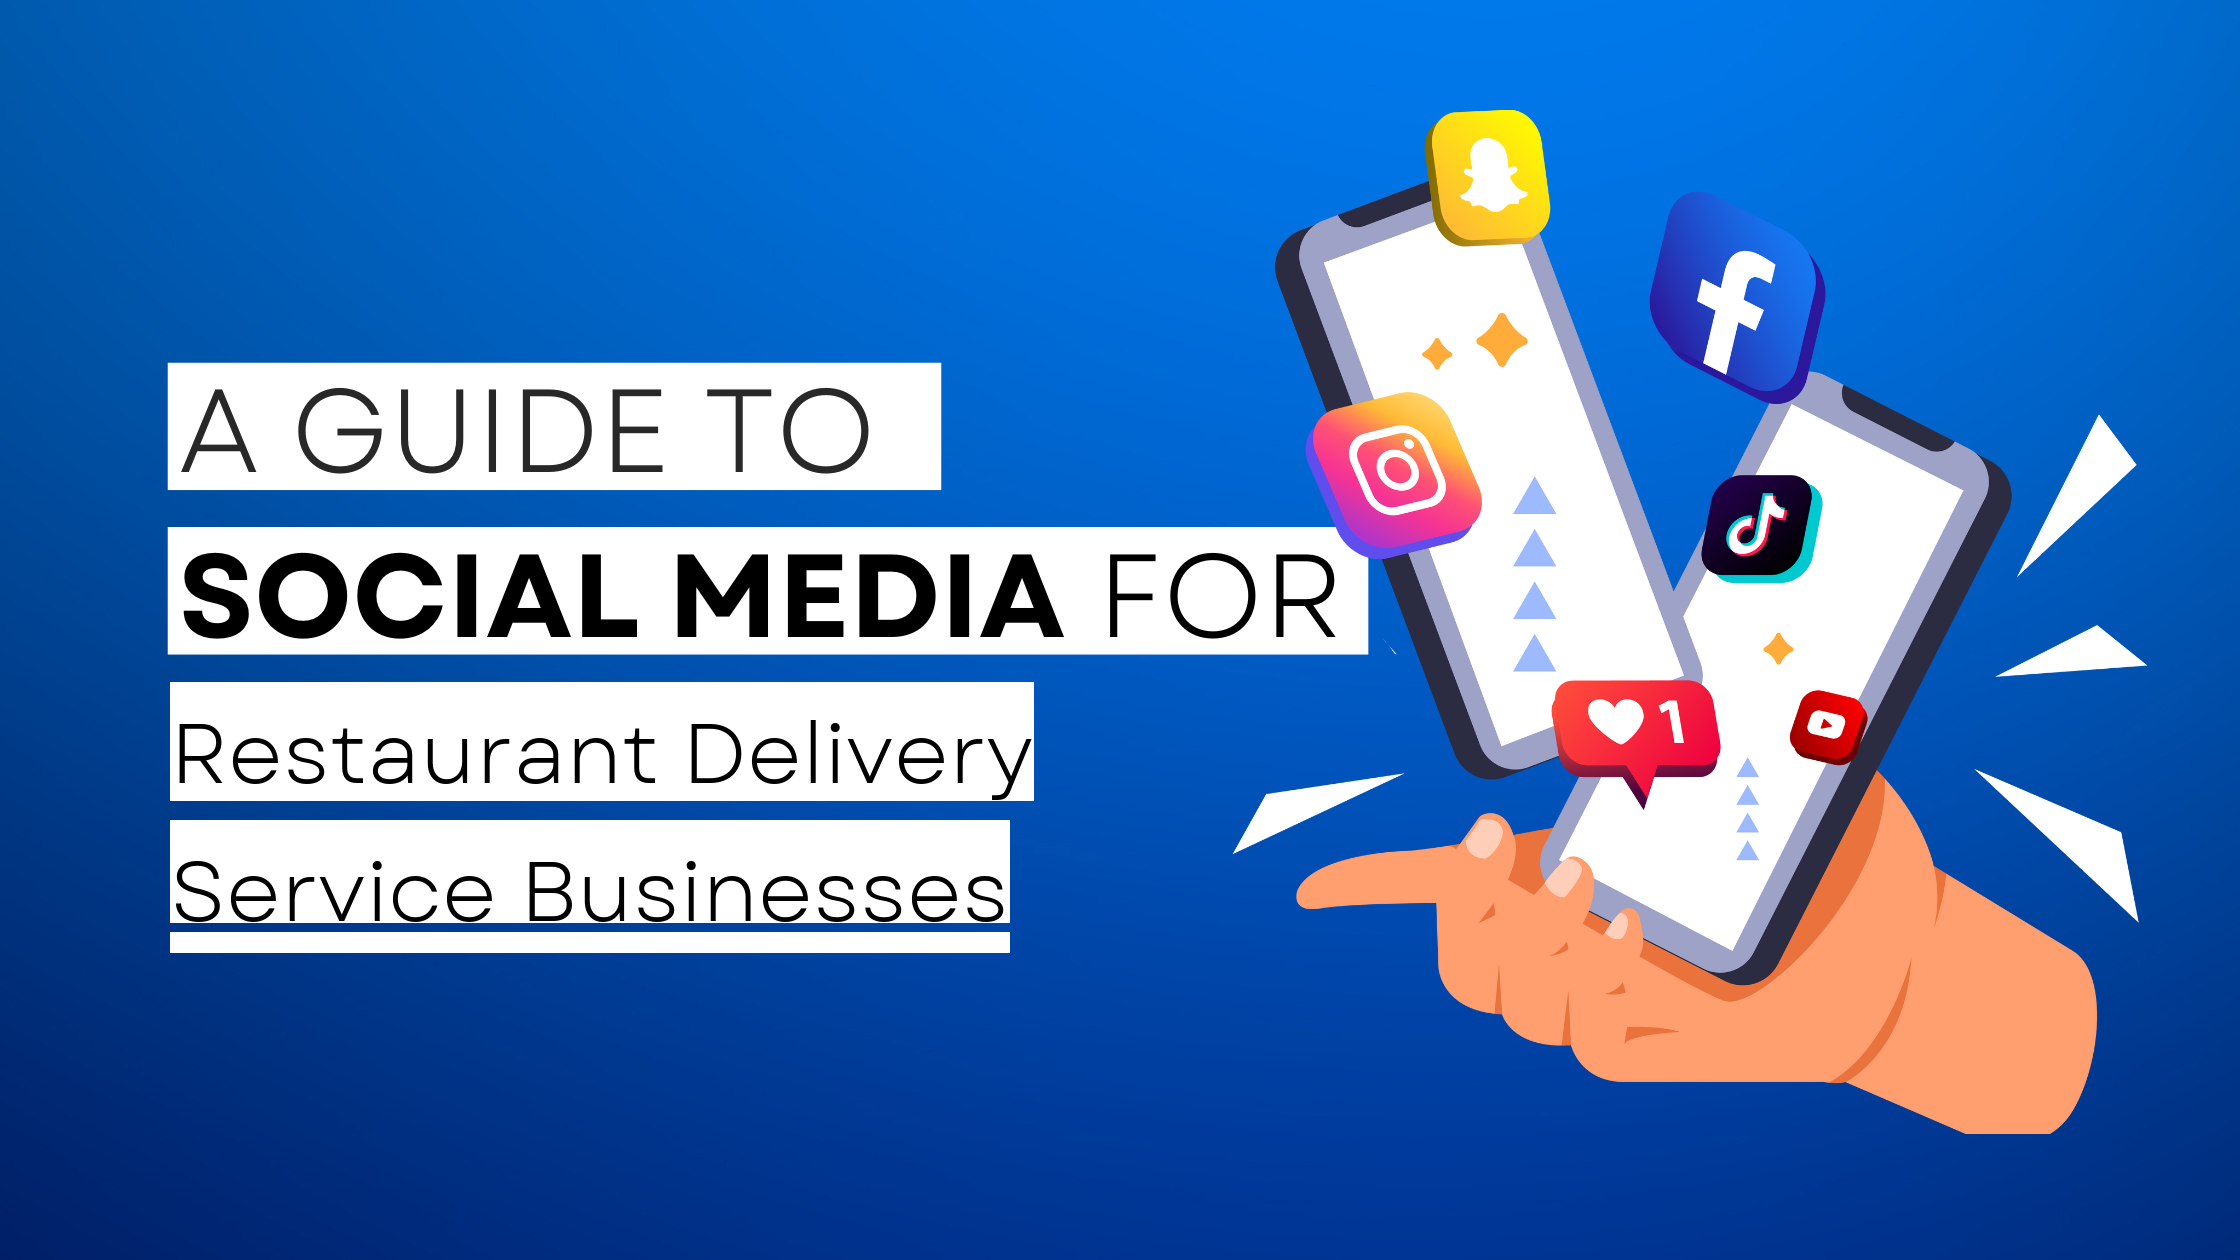 How to start Restaurant Delivery Service  on social media